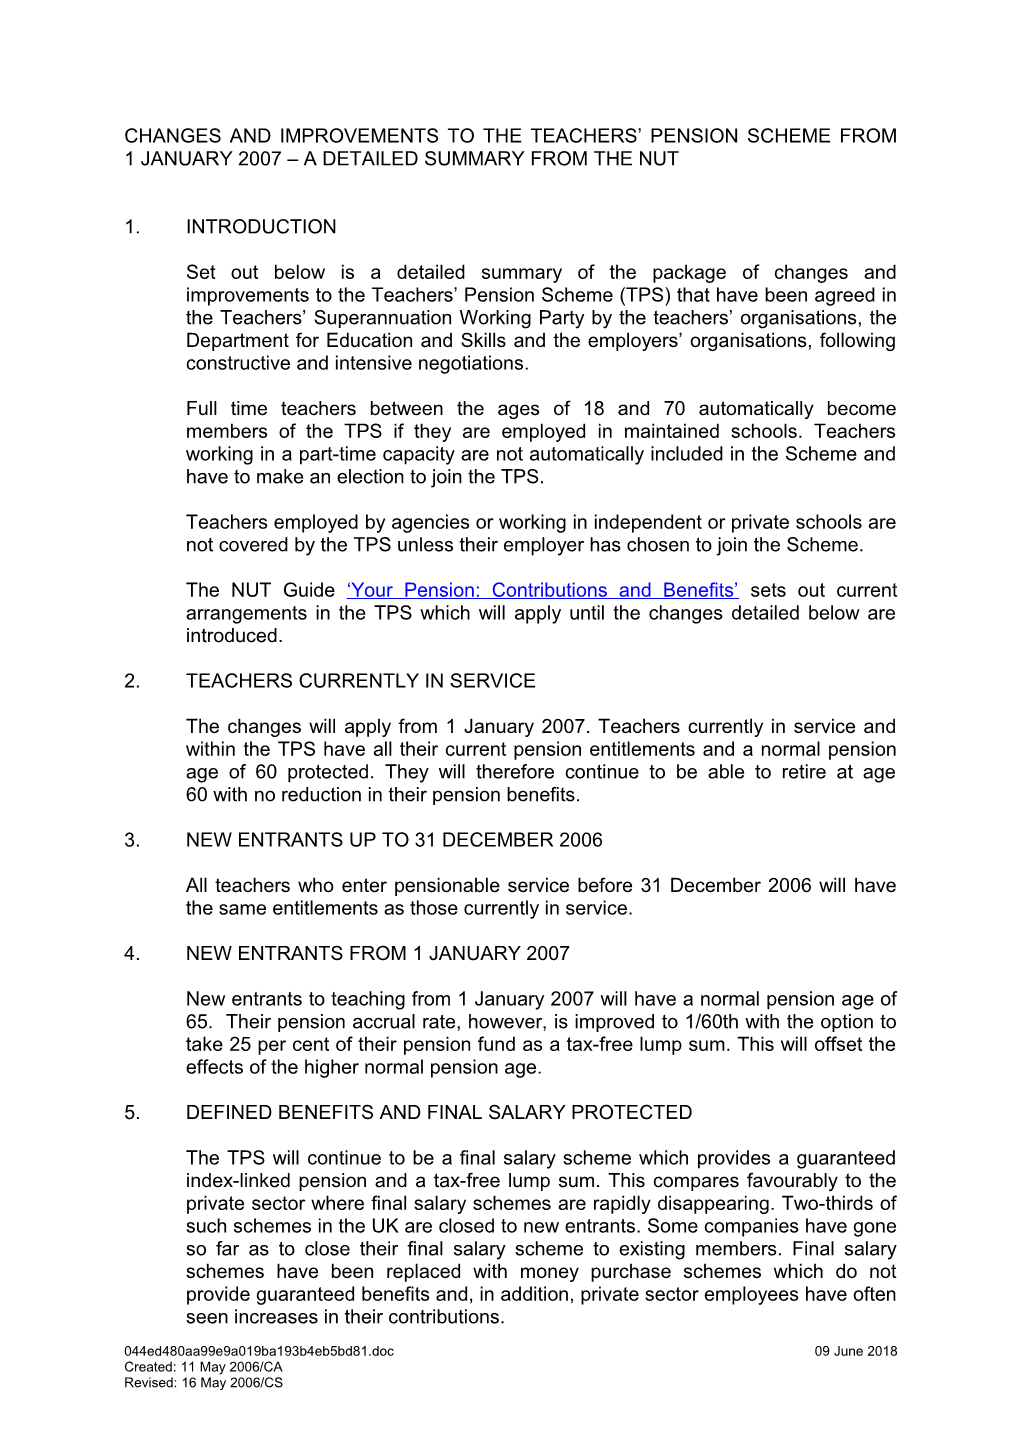 Changes and Improvements to the Teachers Pension Scheme from 1January 2007 a Detailed Summary